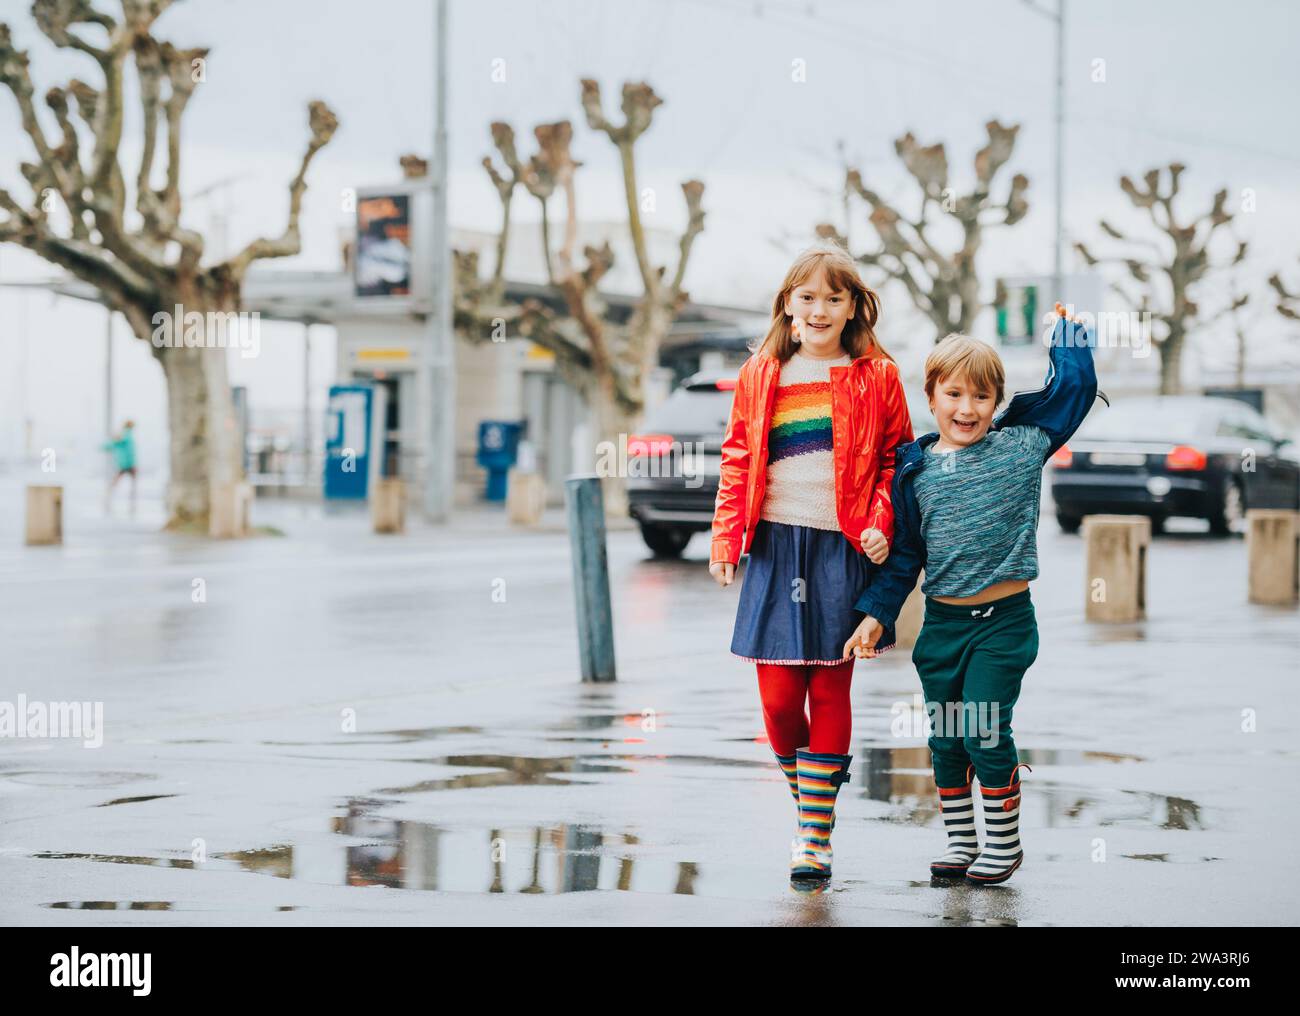 Two funny kids, little brother and sister playing together in a city under the rain in early spring. Chidren wearing rain jackets and boots Stock Photo